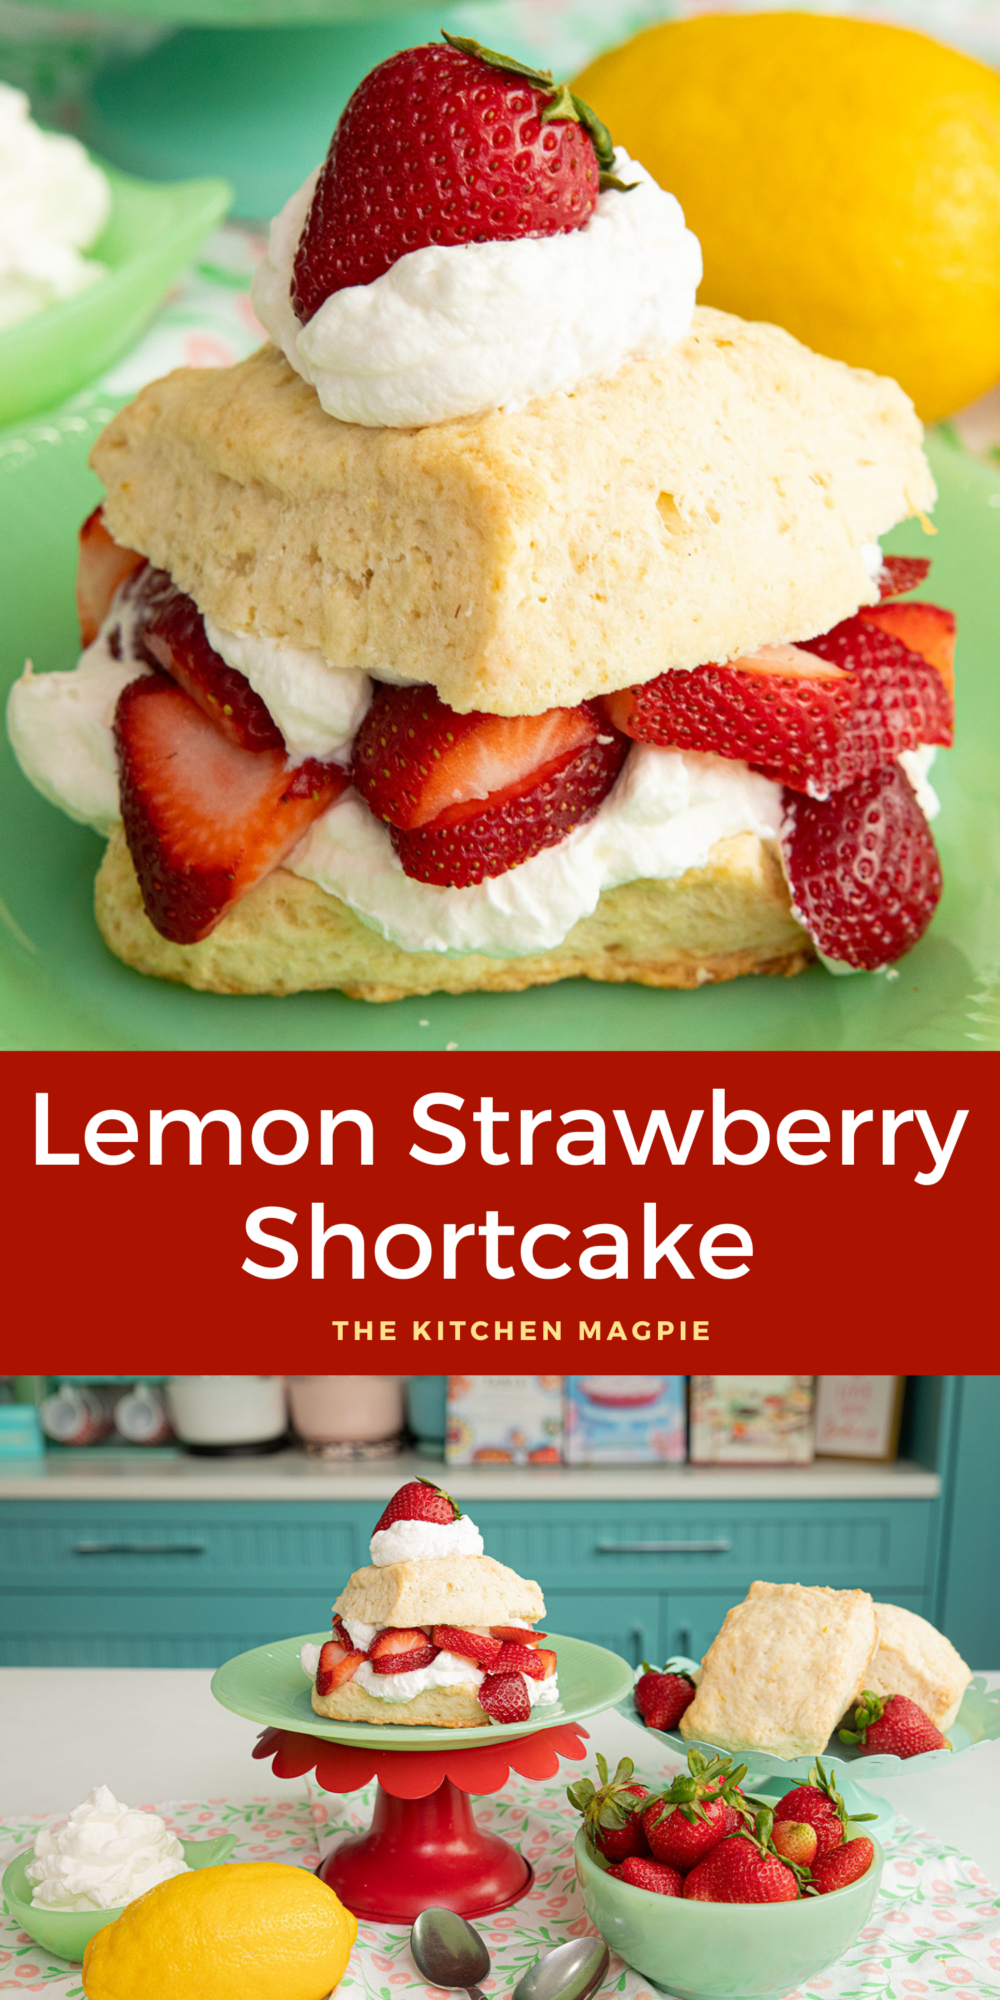 This light and delicious lemon strawberry shortcake is made with lemon tea biscuits. Perfect for afternoon tea!